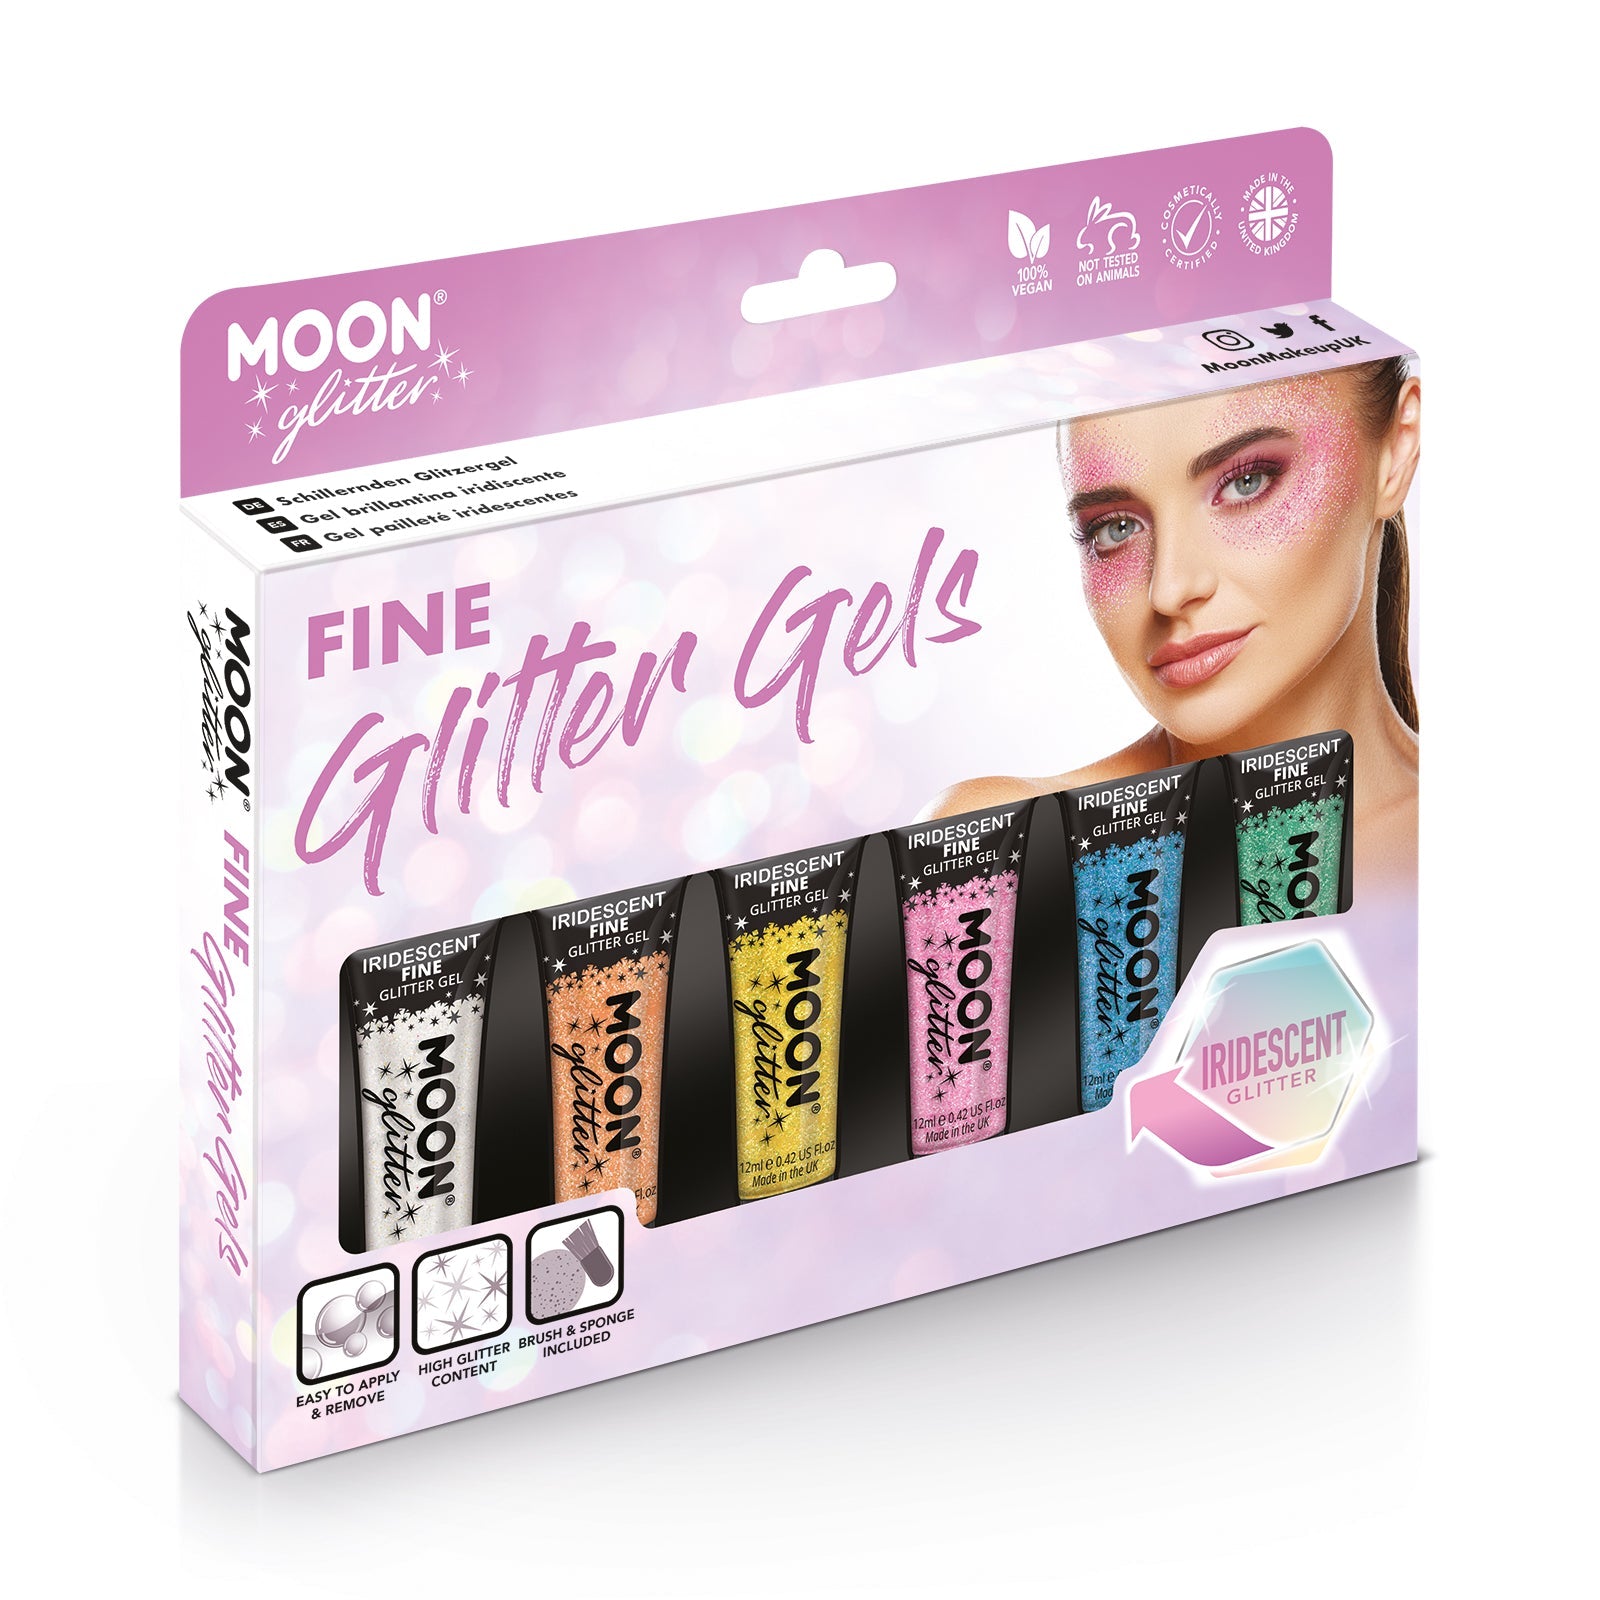 Iridescent Fine Face & Body Glitter Gel Boxset-6Tubes,Light,Bsh,Spng. Cosmetically certified, FDA & Health Canada compliant, cruelty free and vegan.